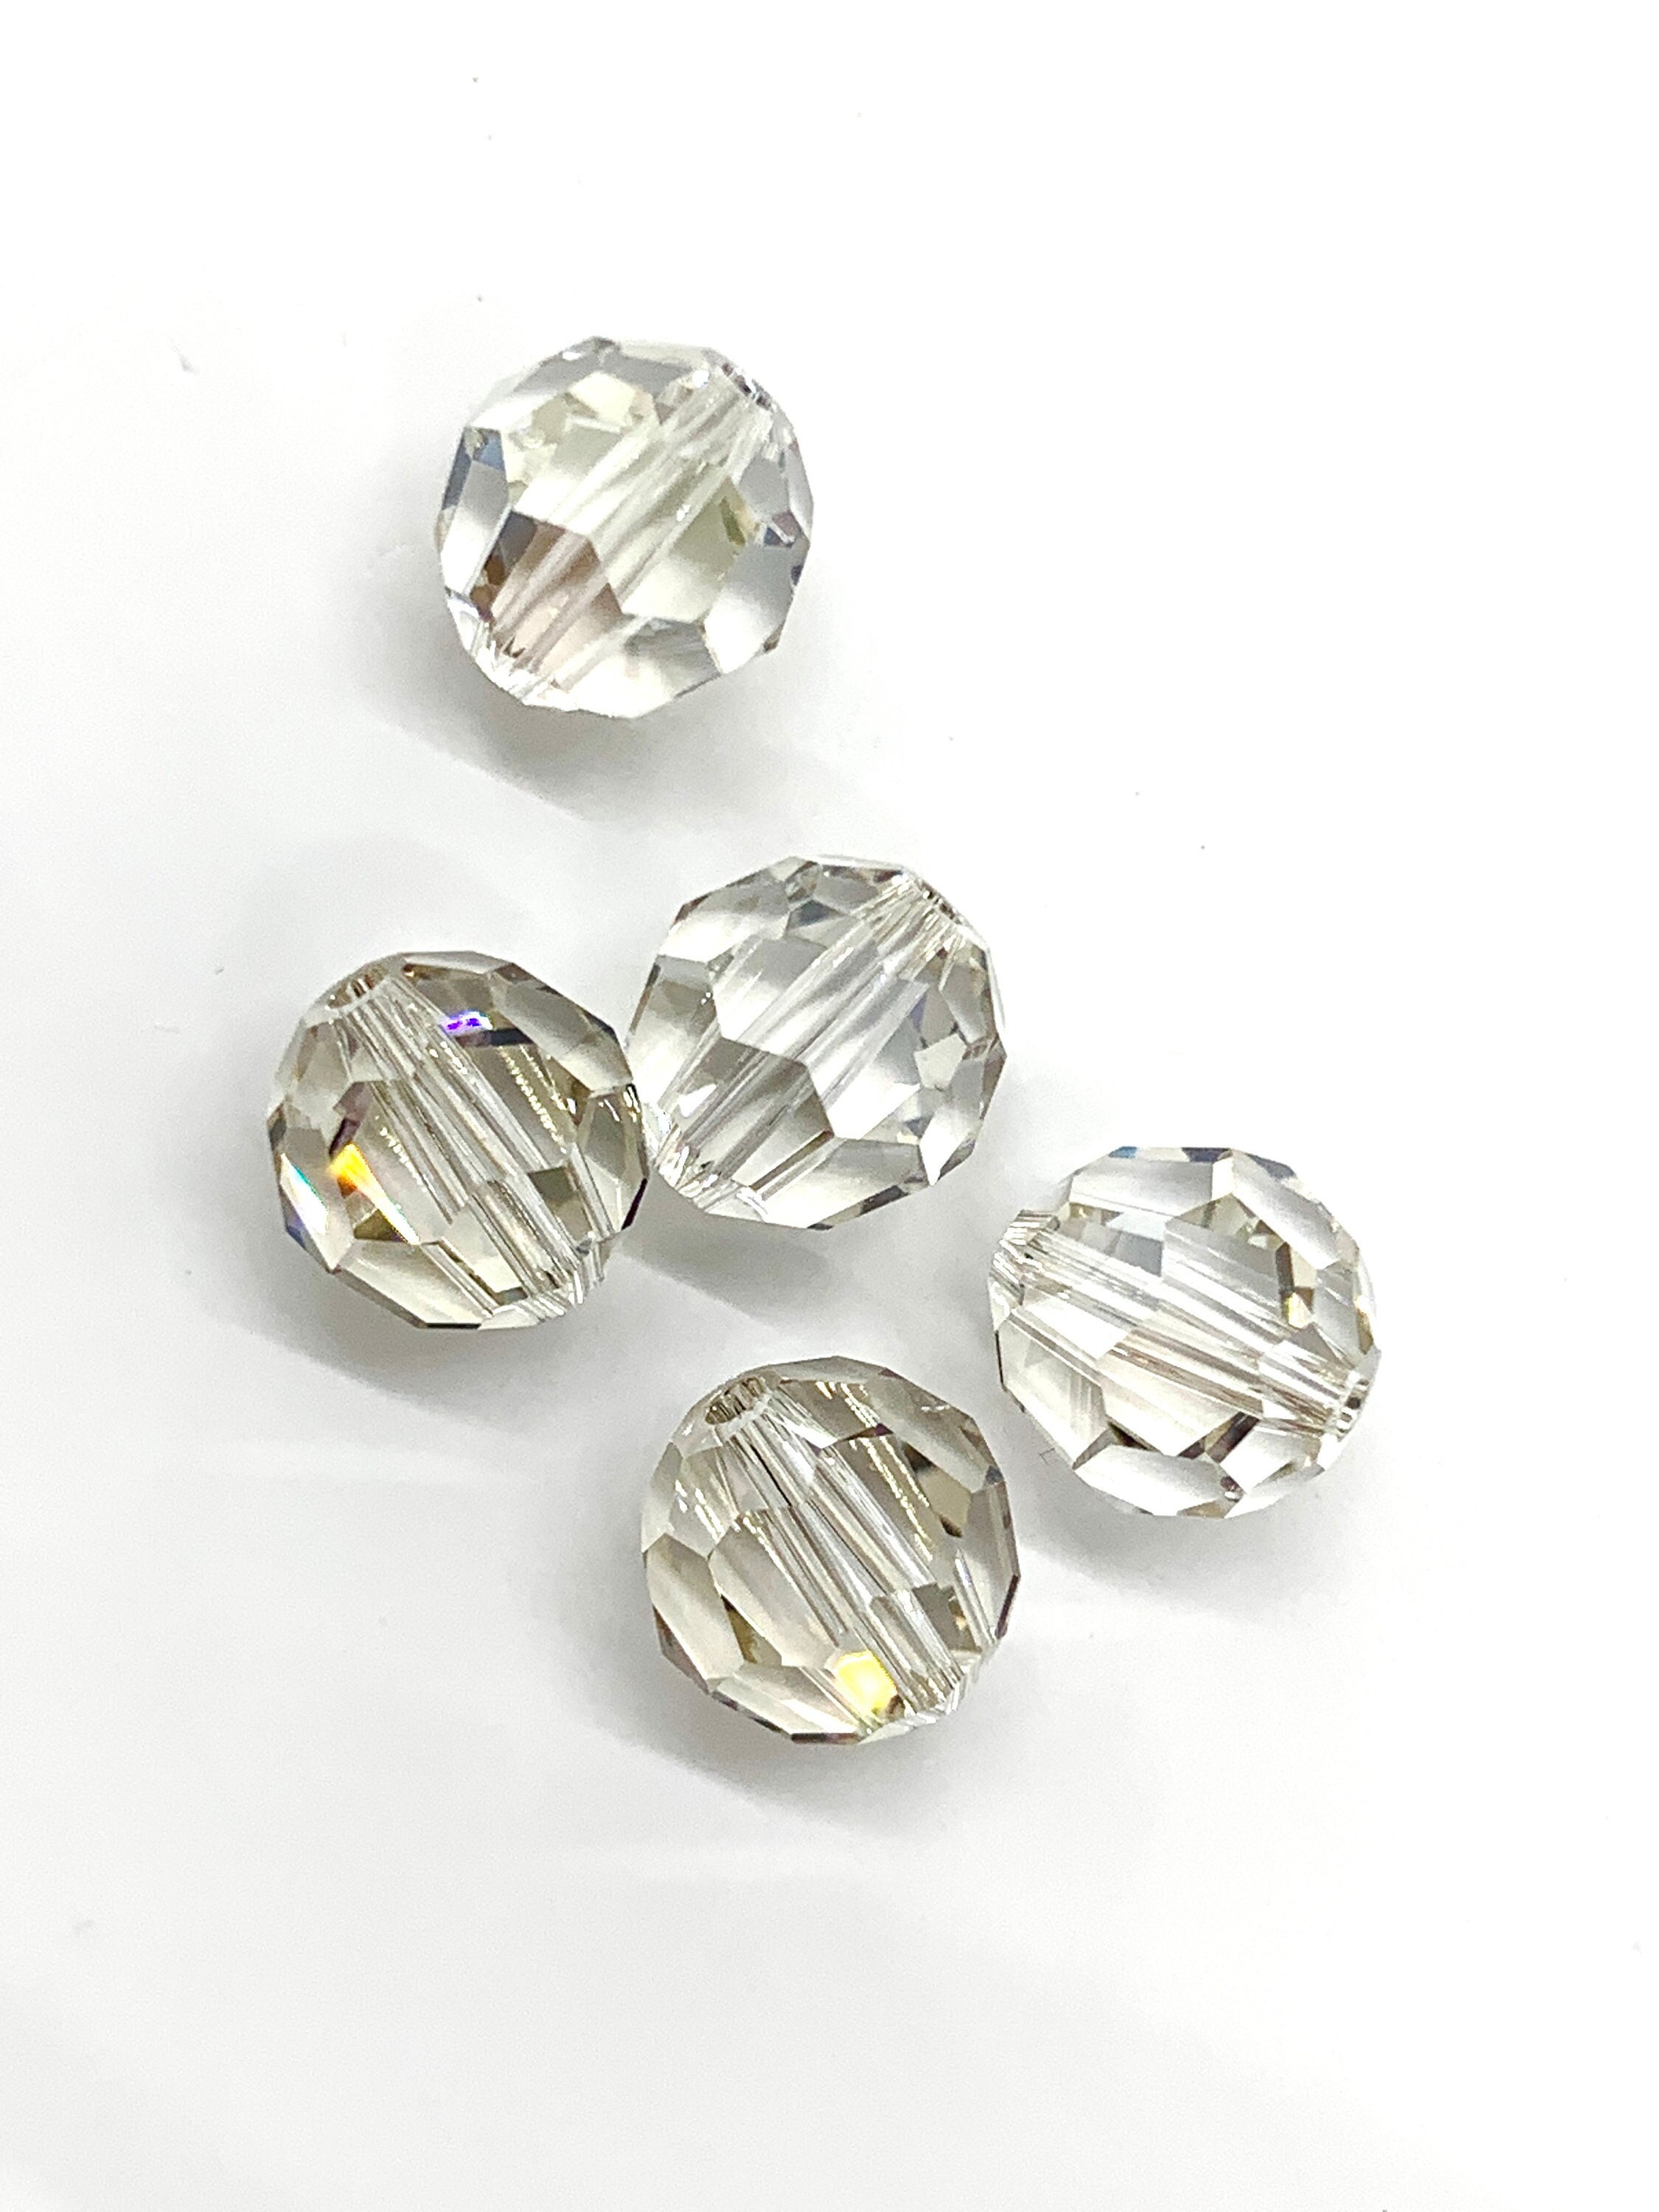 SWAROVSKI Crystal Element 5000 8mm Faceted Round Bead Many Color #1 